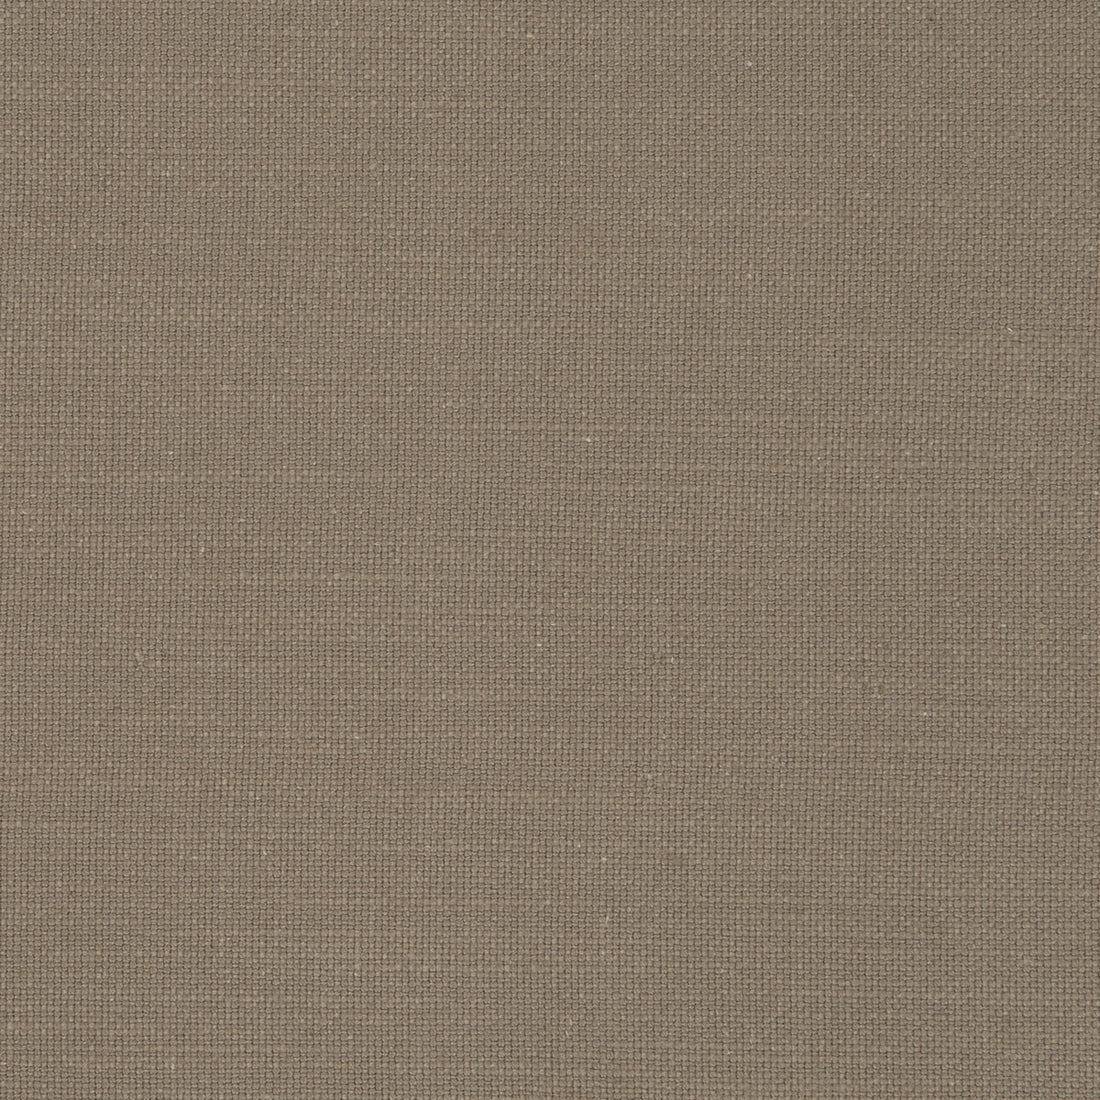 Nantucket fabric in earth color - pattern F0594/17.CAC.0 - by Clarke And Clarke in the Clarke &amp; Clarke Nantucket collection